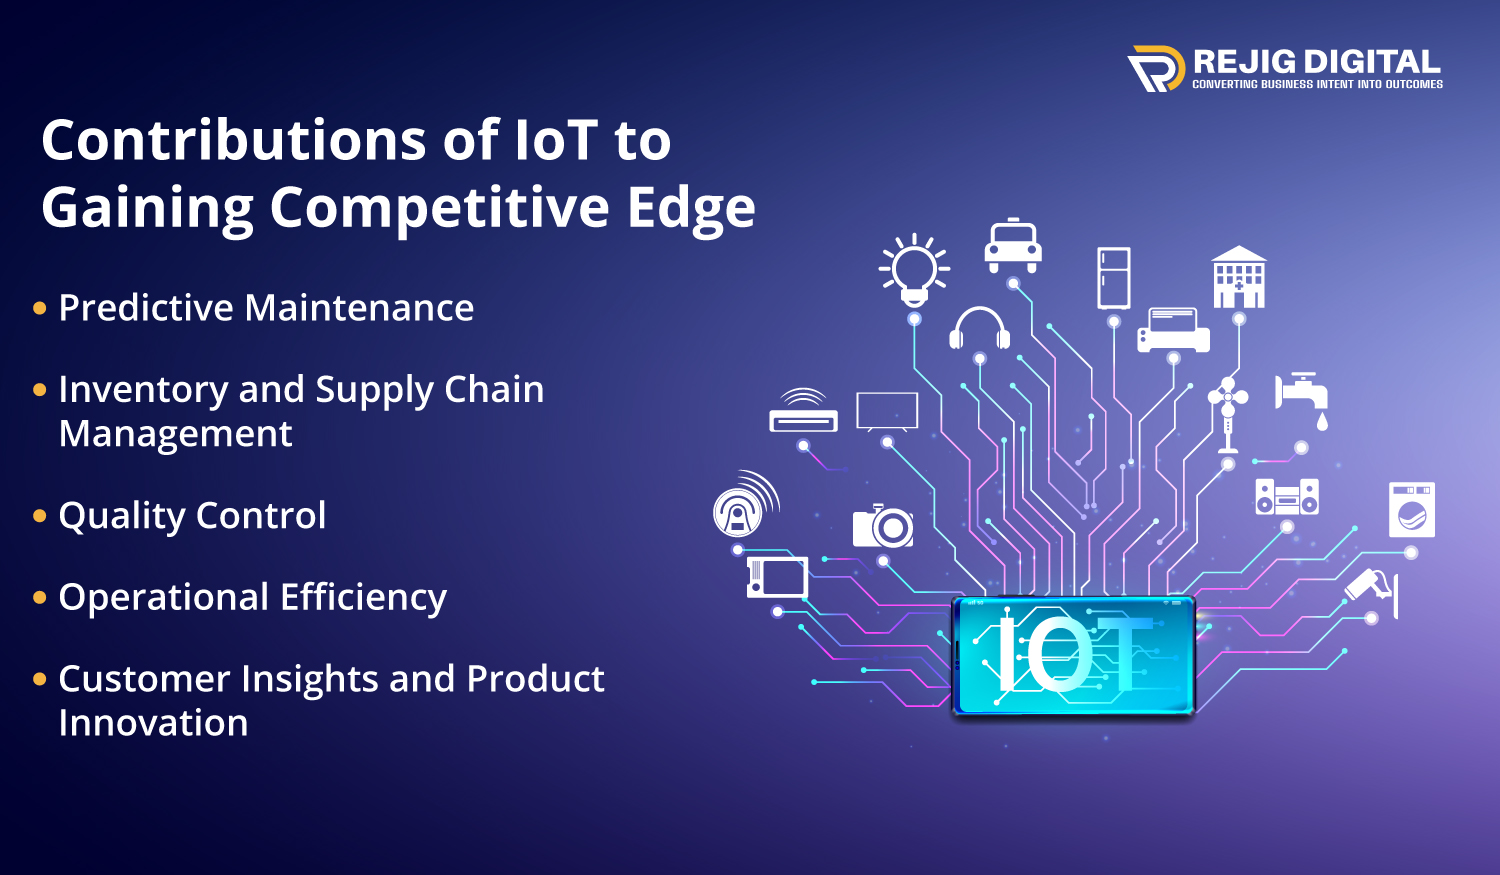 Contributions of IoT to Gaining Competitive Edge